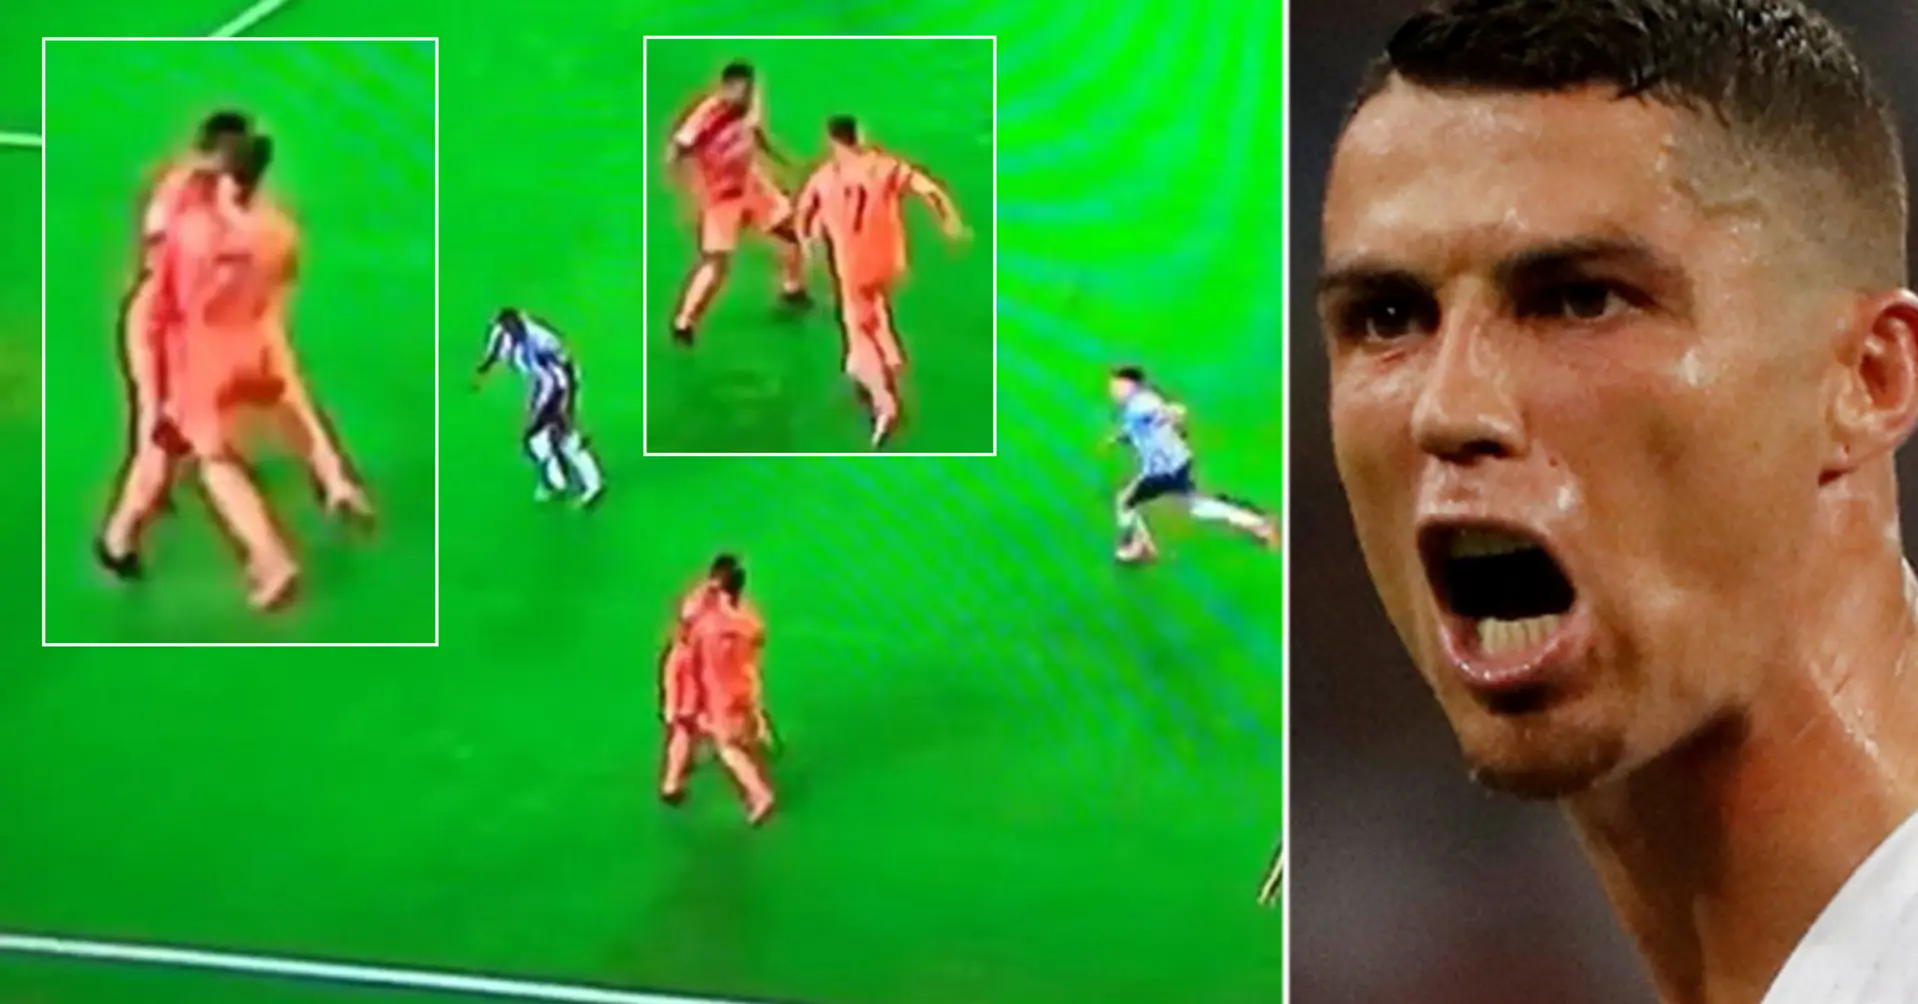 Cristiano nutmegs lying Porto player only to be immediately blocked by his own teammate Alex Sandro